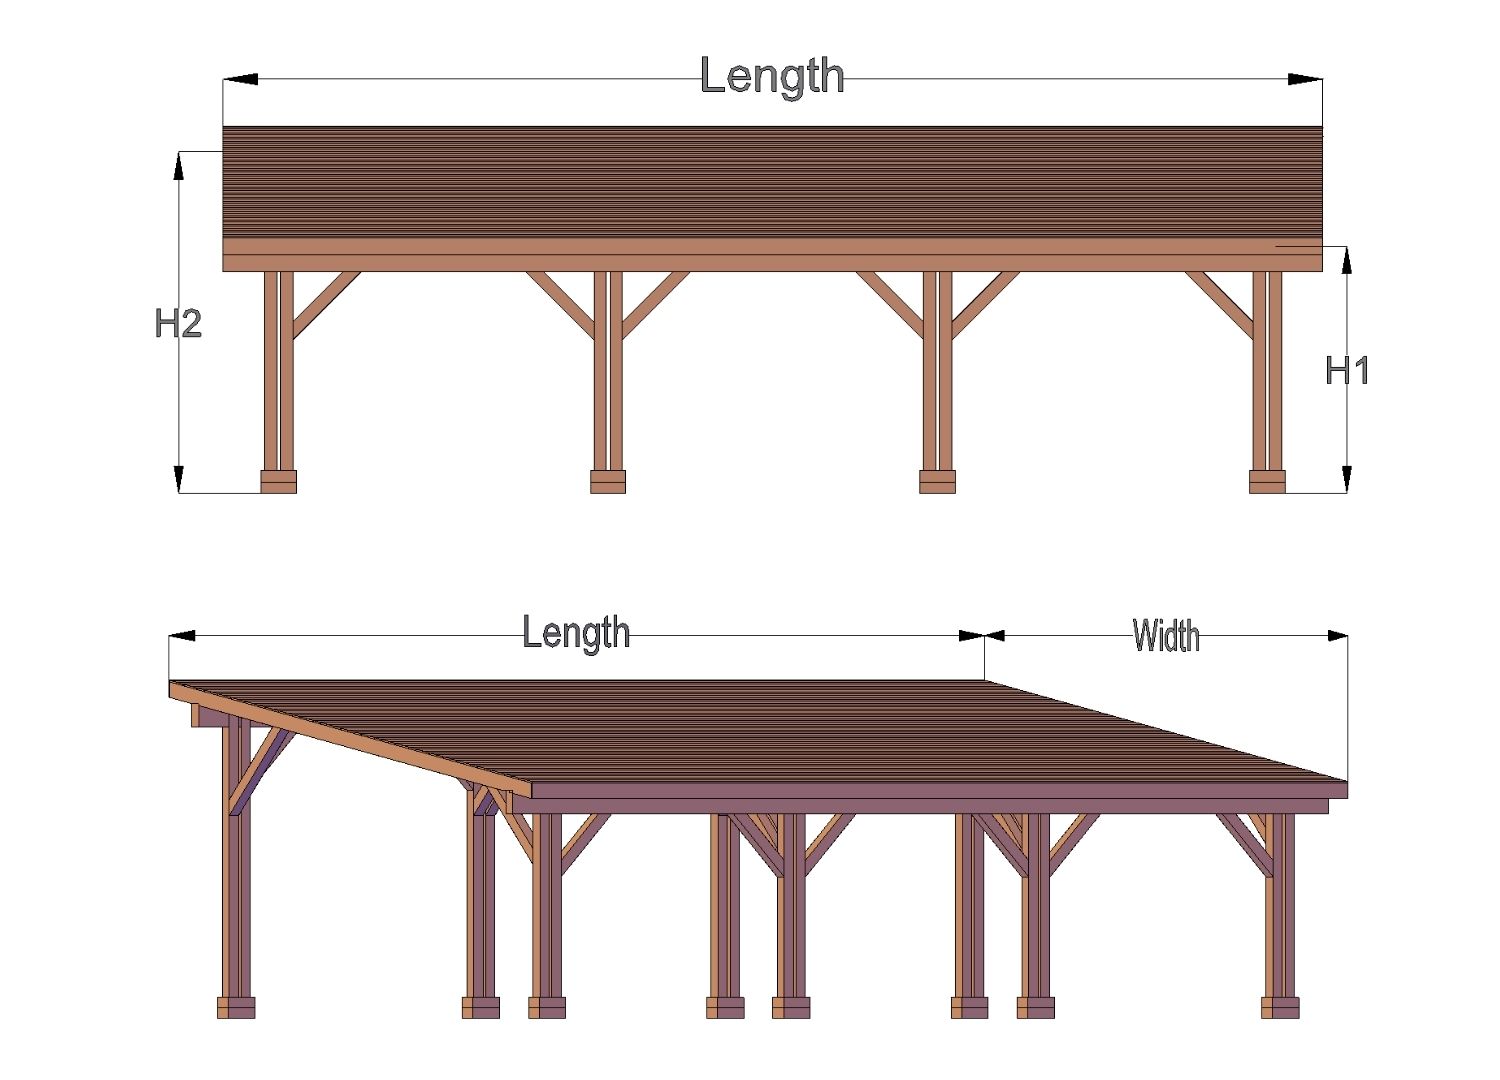 Sample drawings of the Carport Pavilion with three parking bays.